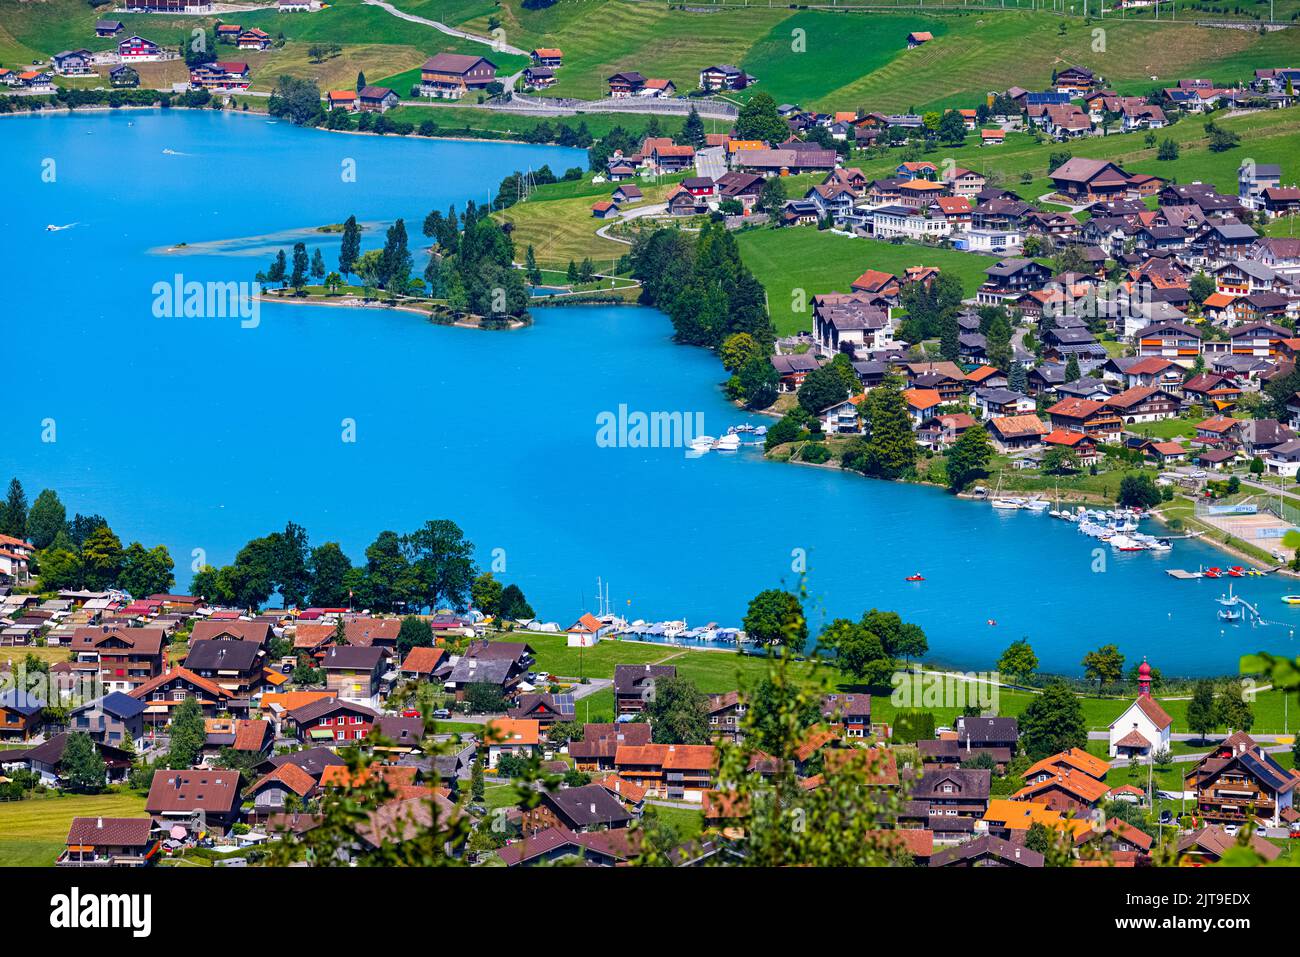 The famous Chalrutirank viewpoint overlooking Lungern, a municipality and place in the Swiss canton of Obwalden. Lungern is located on Lake Lungern an Stock Photo